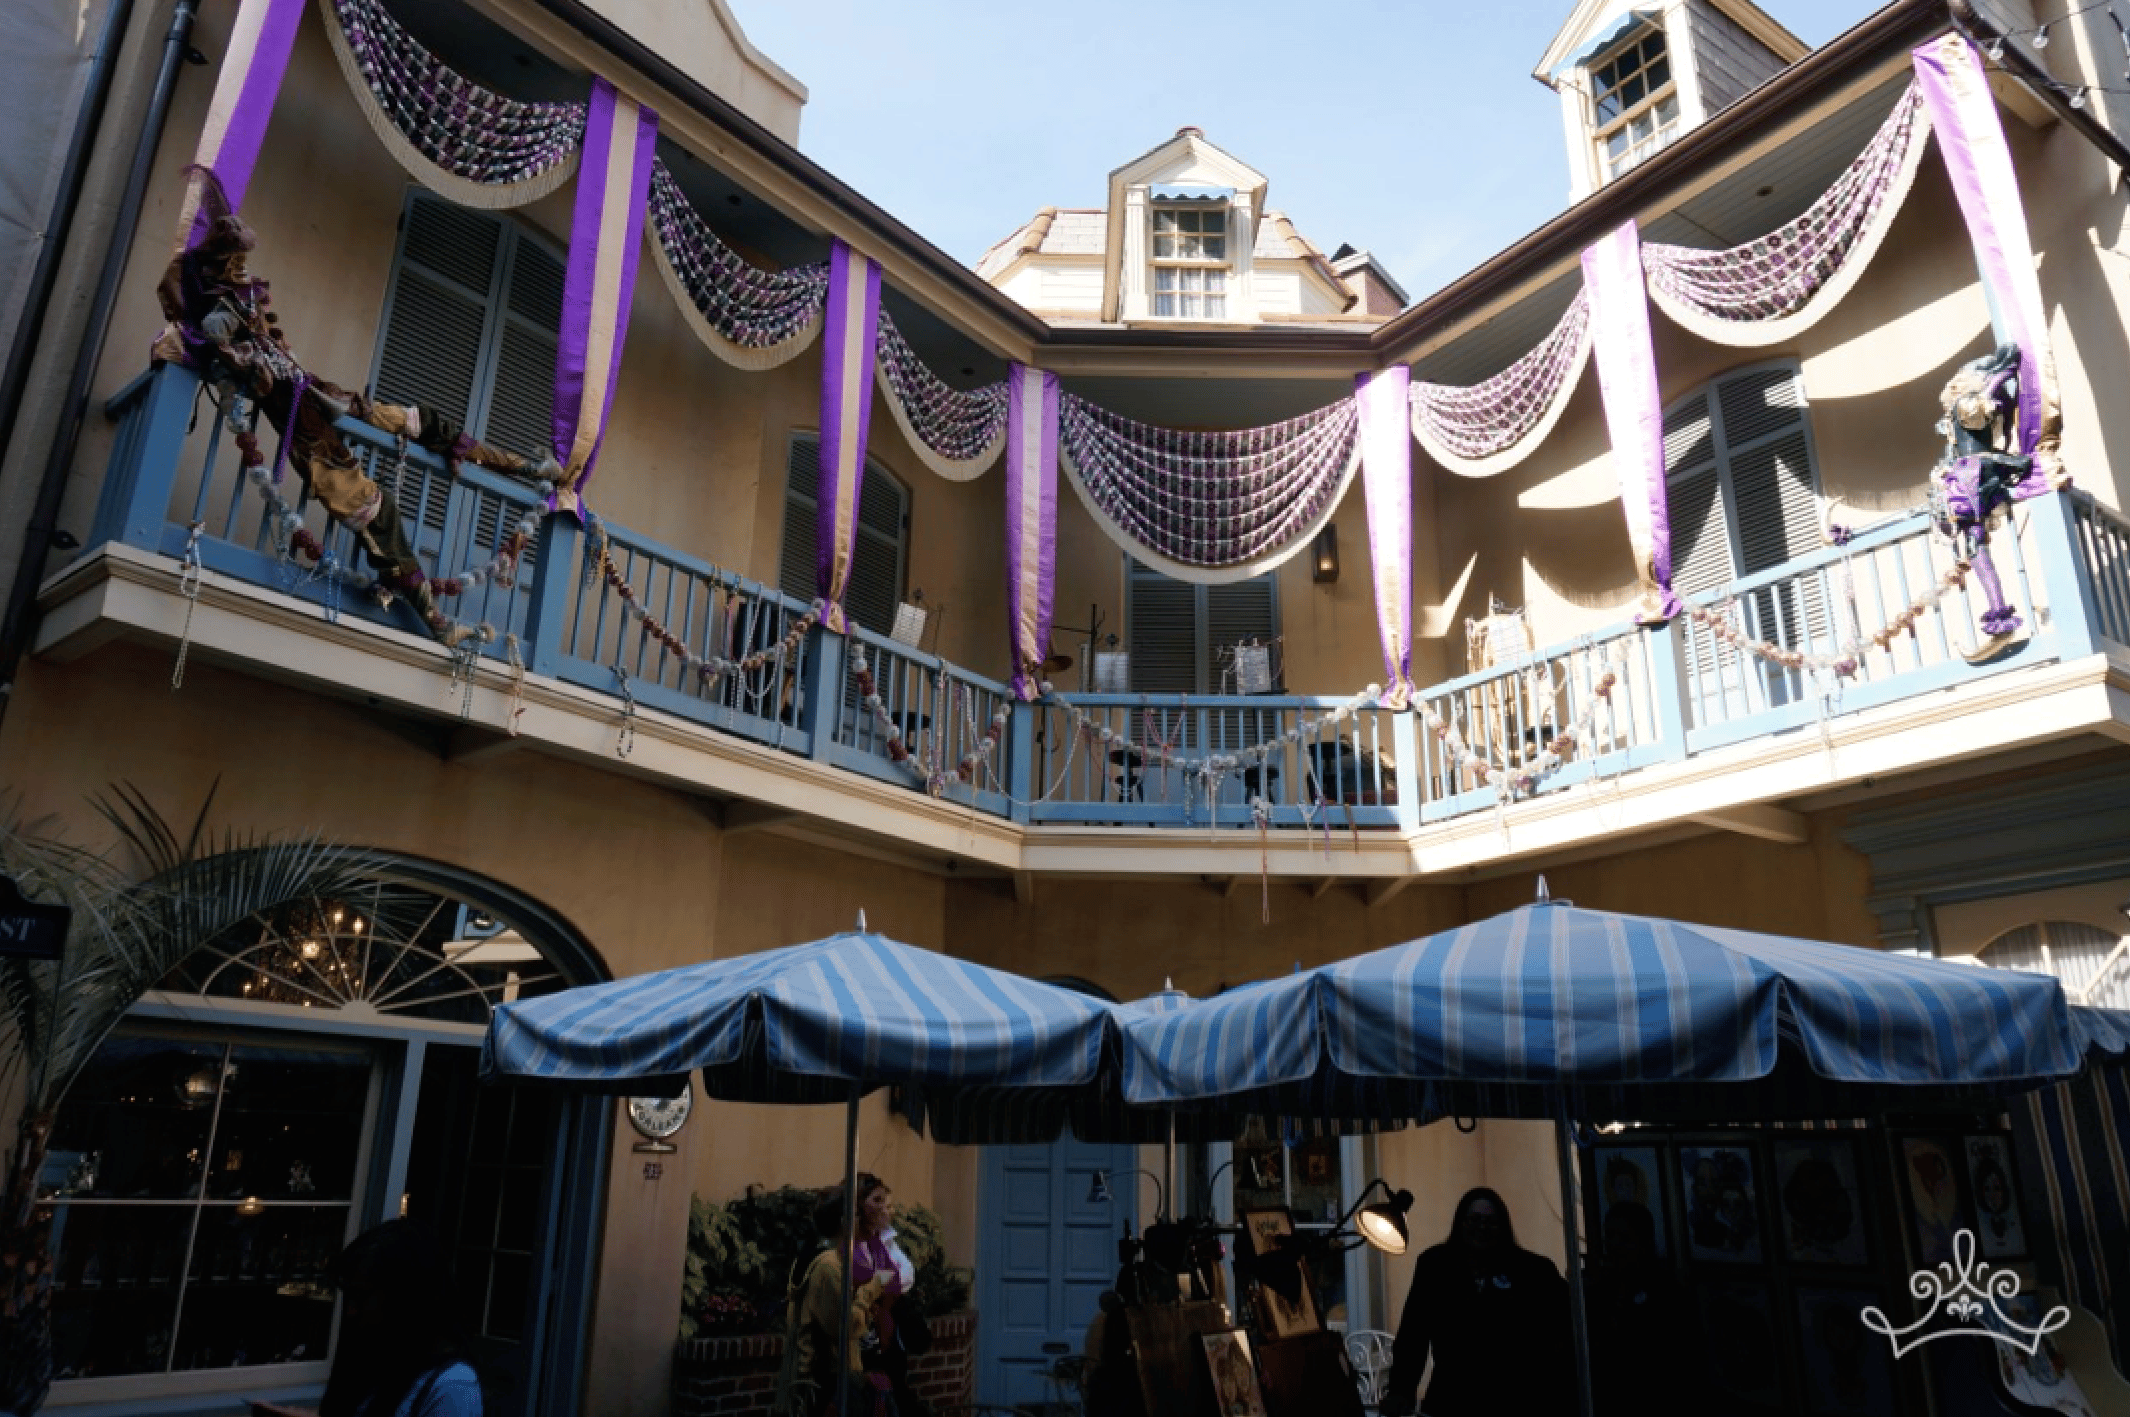 New Orleans Square at Disneyland - Overview, History, and Trivia